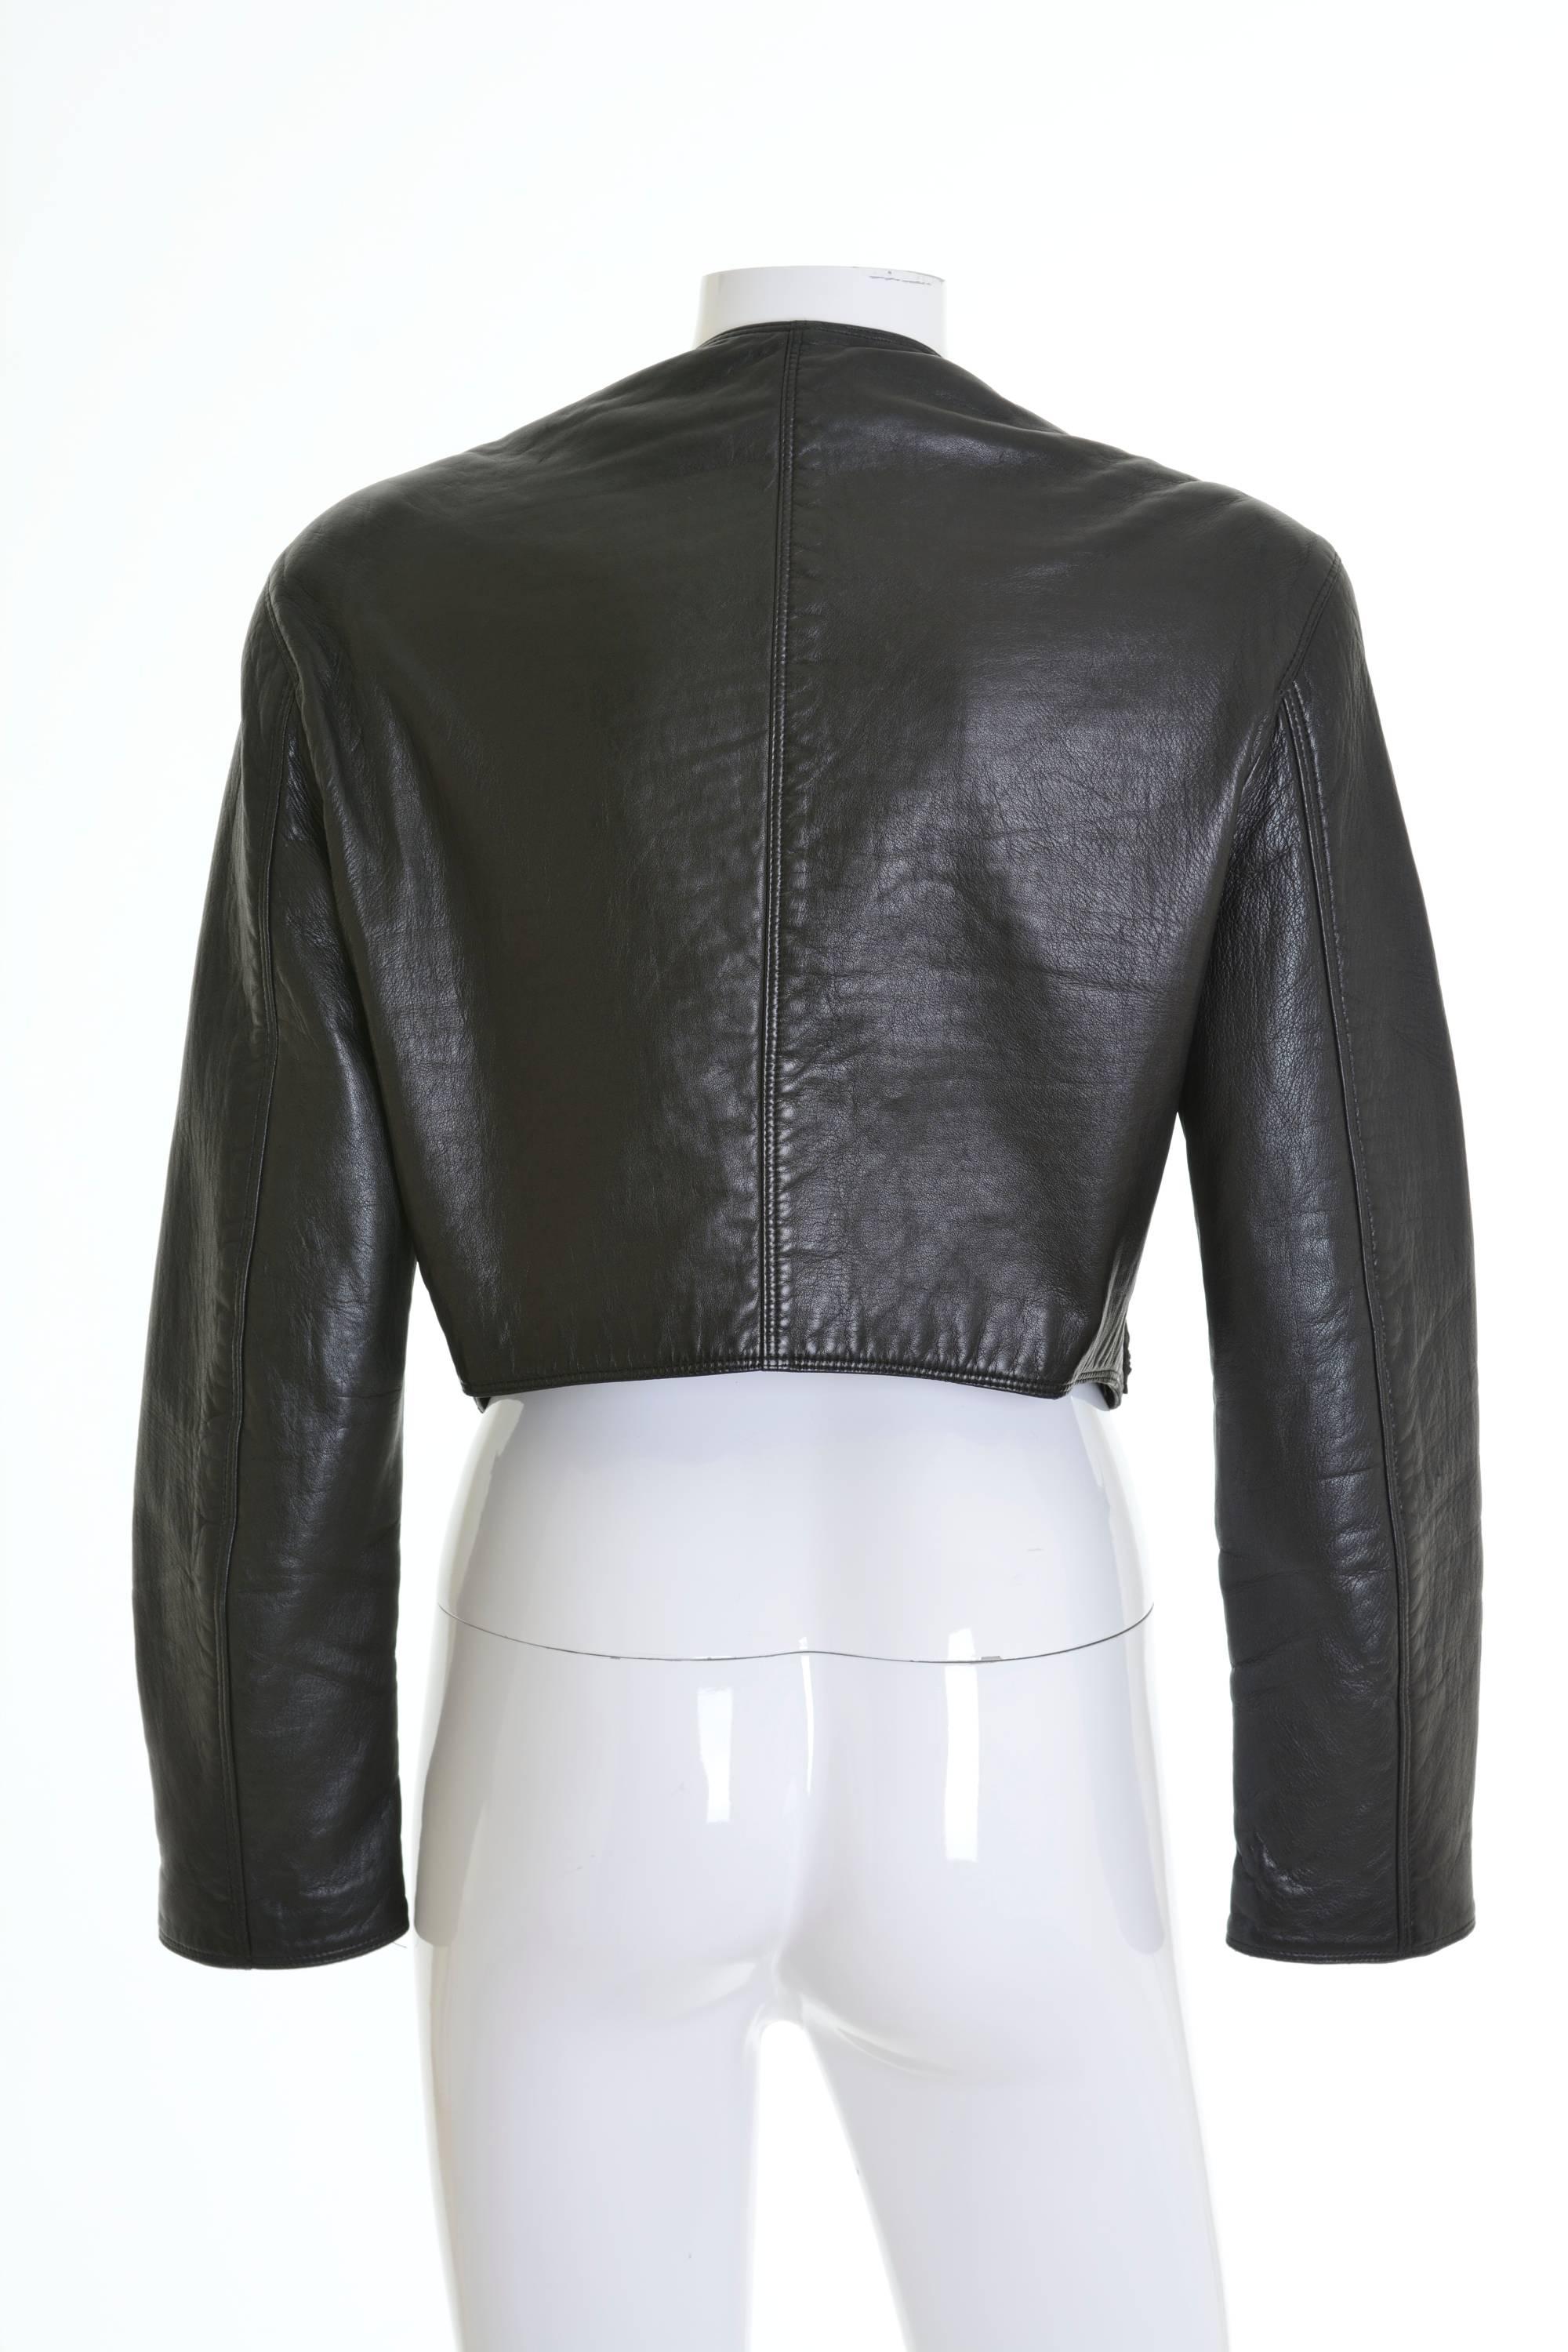 This gorgeous Gianni Versace bolero jacket is in black soft leather with amazing  metal jewelry, studs and trimming embroidery. It has padded shoulder and is fully satin lined.

Good vintage condition

Label: Gianni Versace - Made in Italy
Fabric: